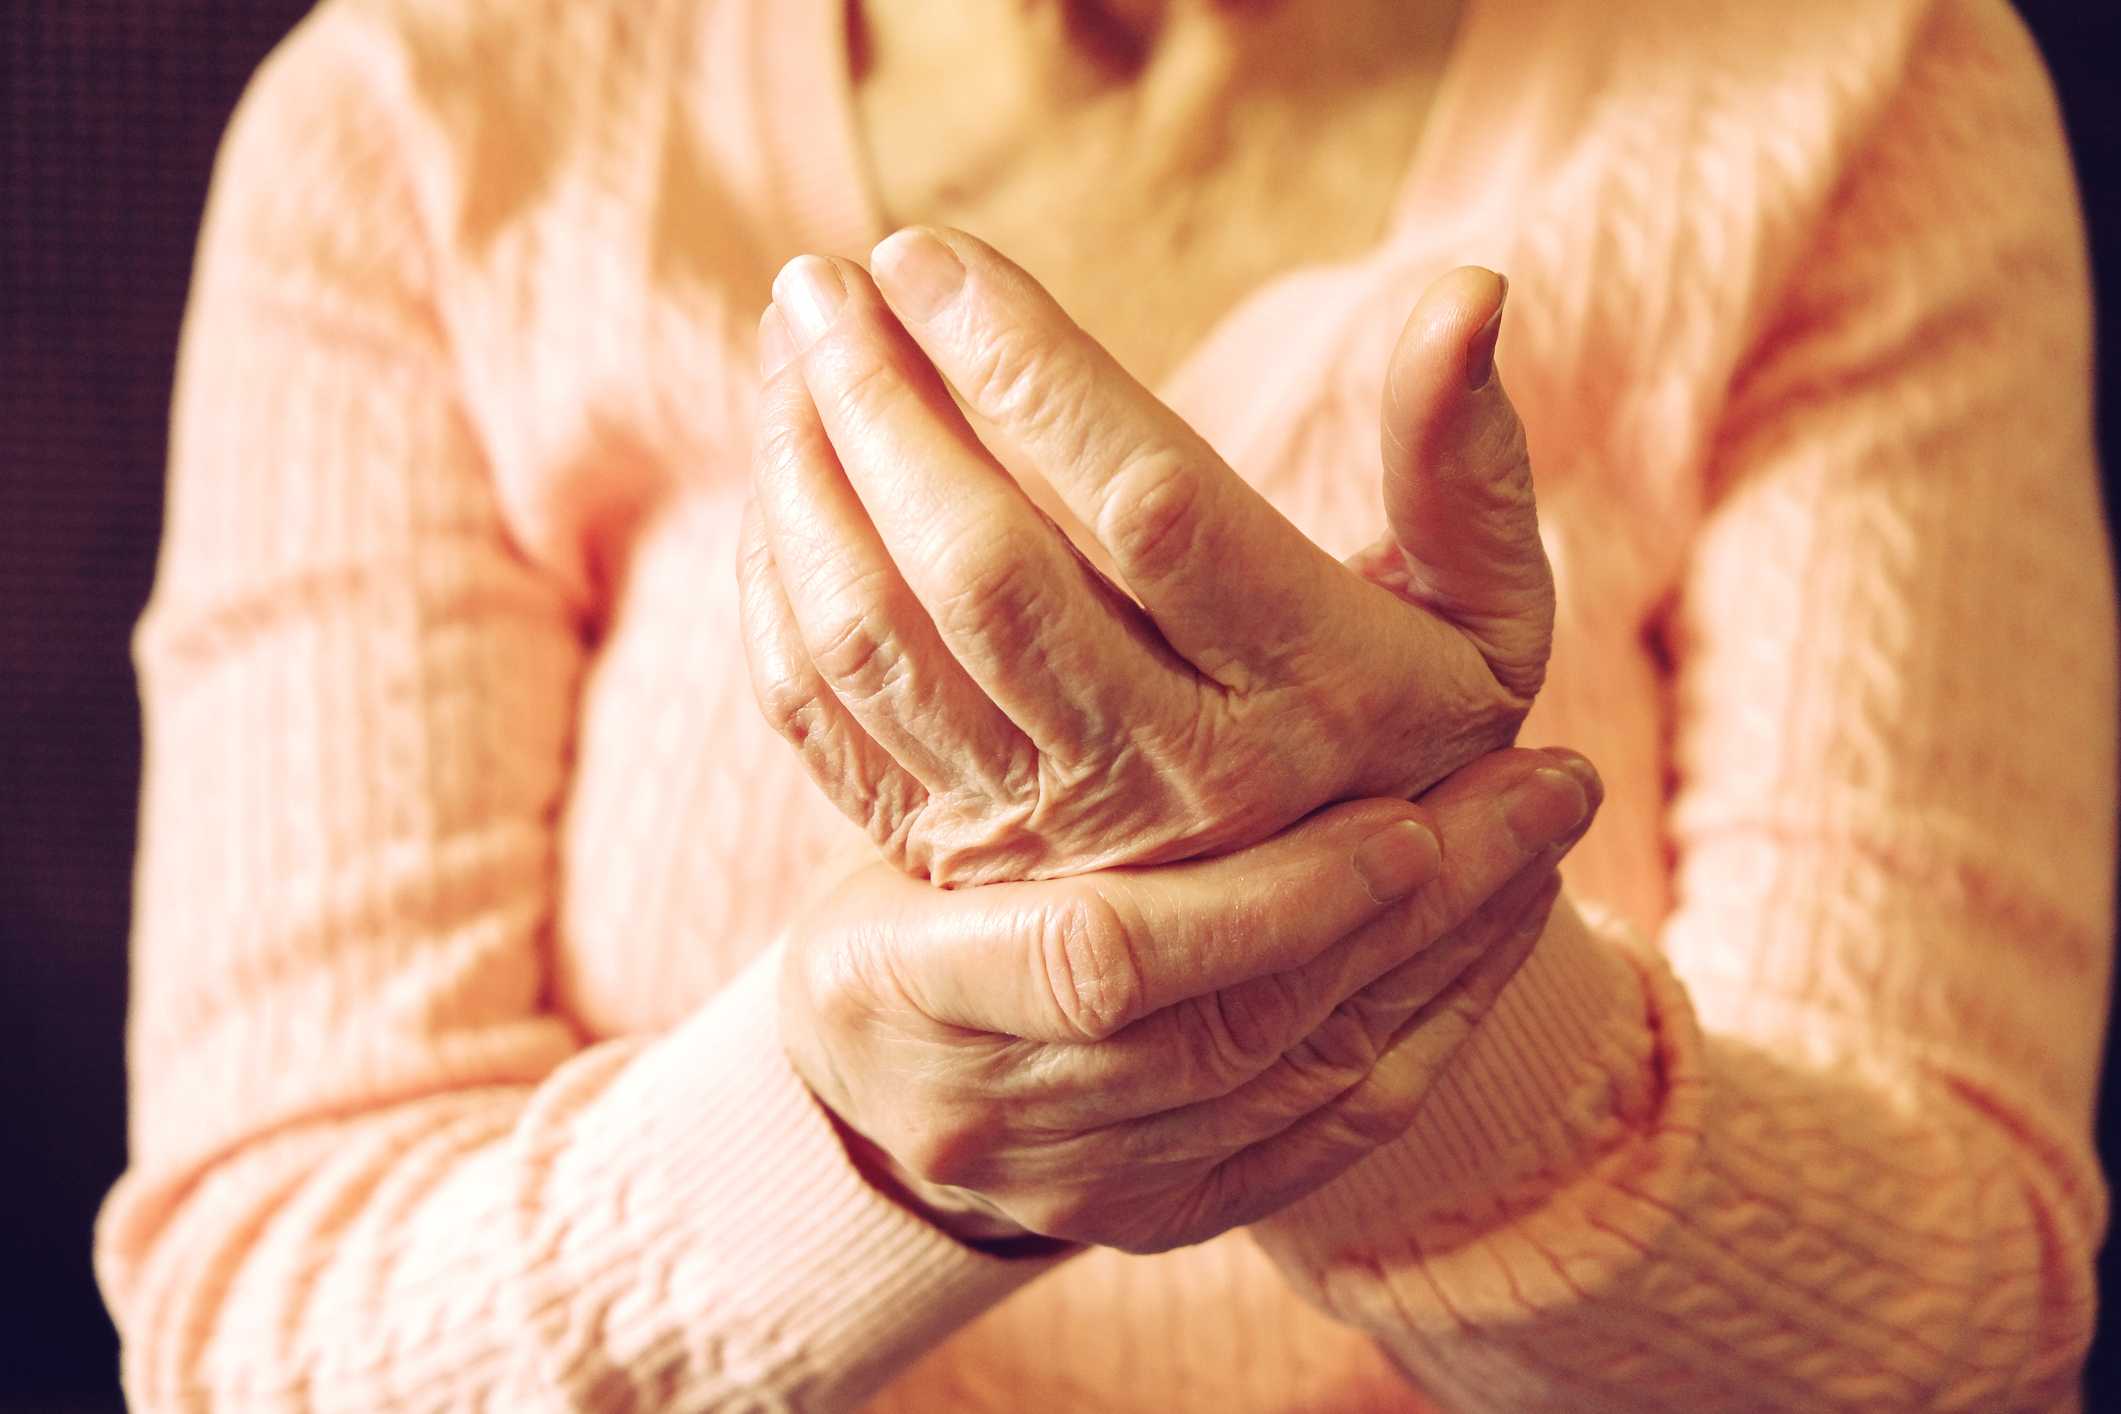 Wrist Joint Pains In Elderly People-Tips & Tricks To Relieve Pain